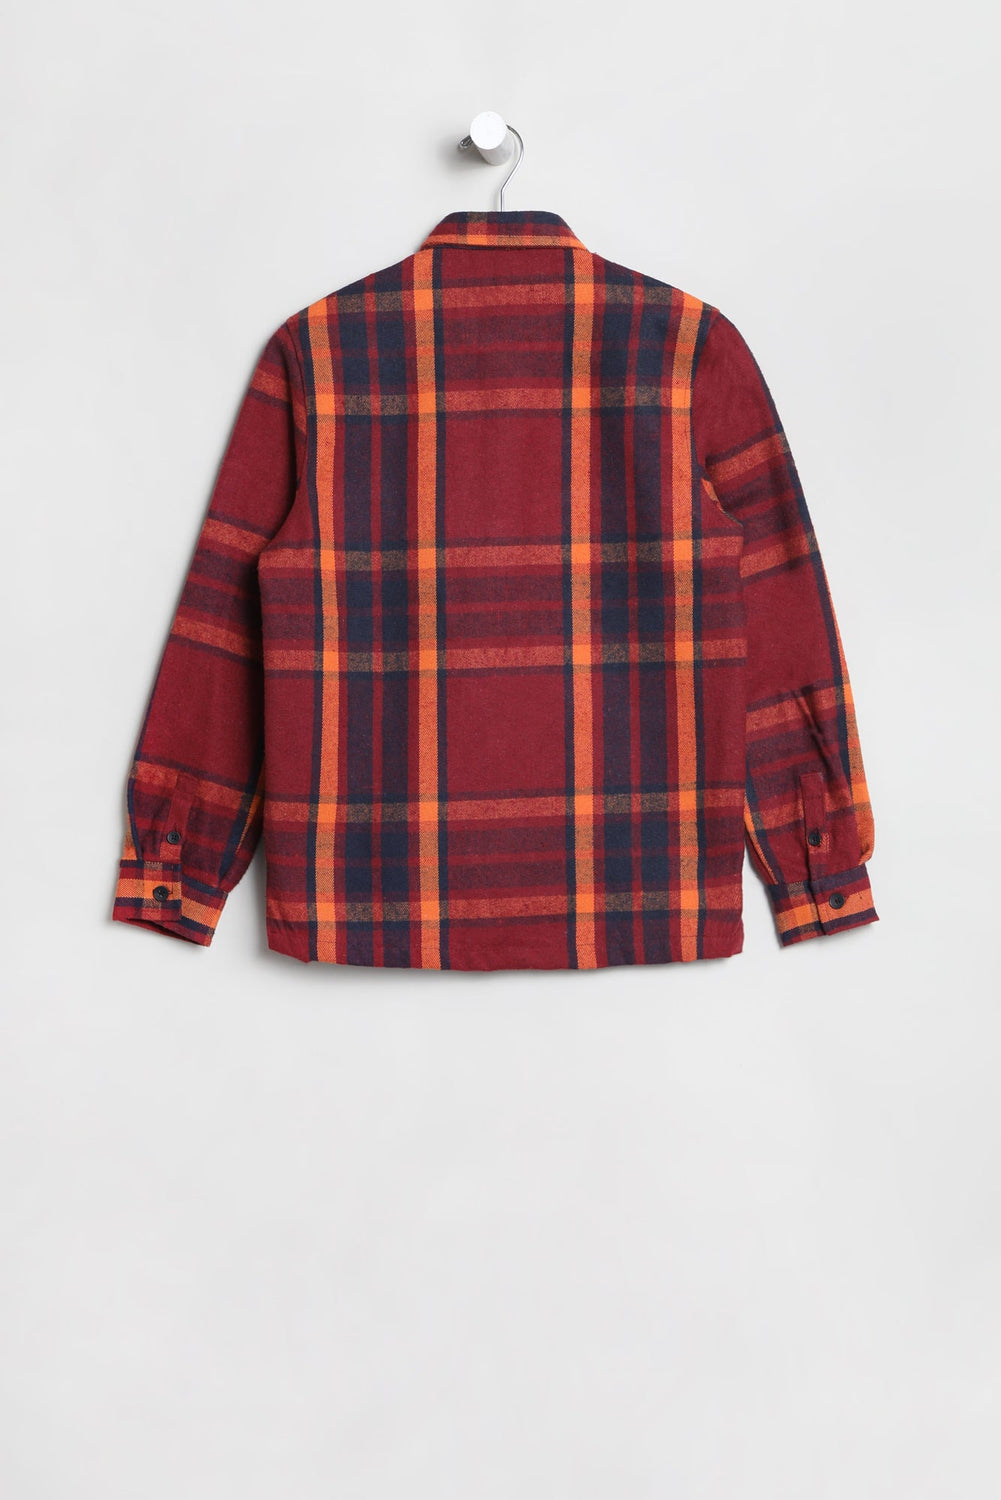 Amnesia Youth Plaid Button-Up Red